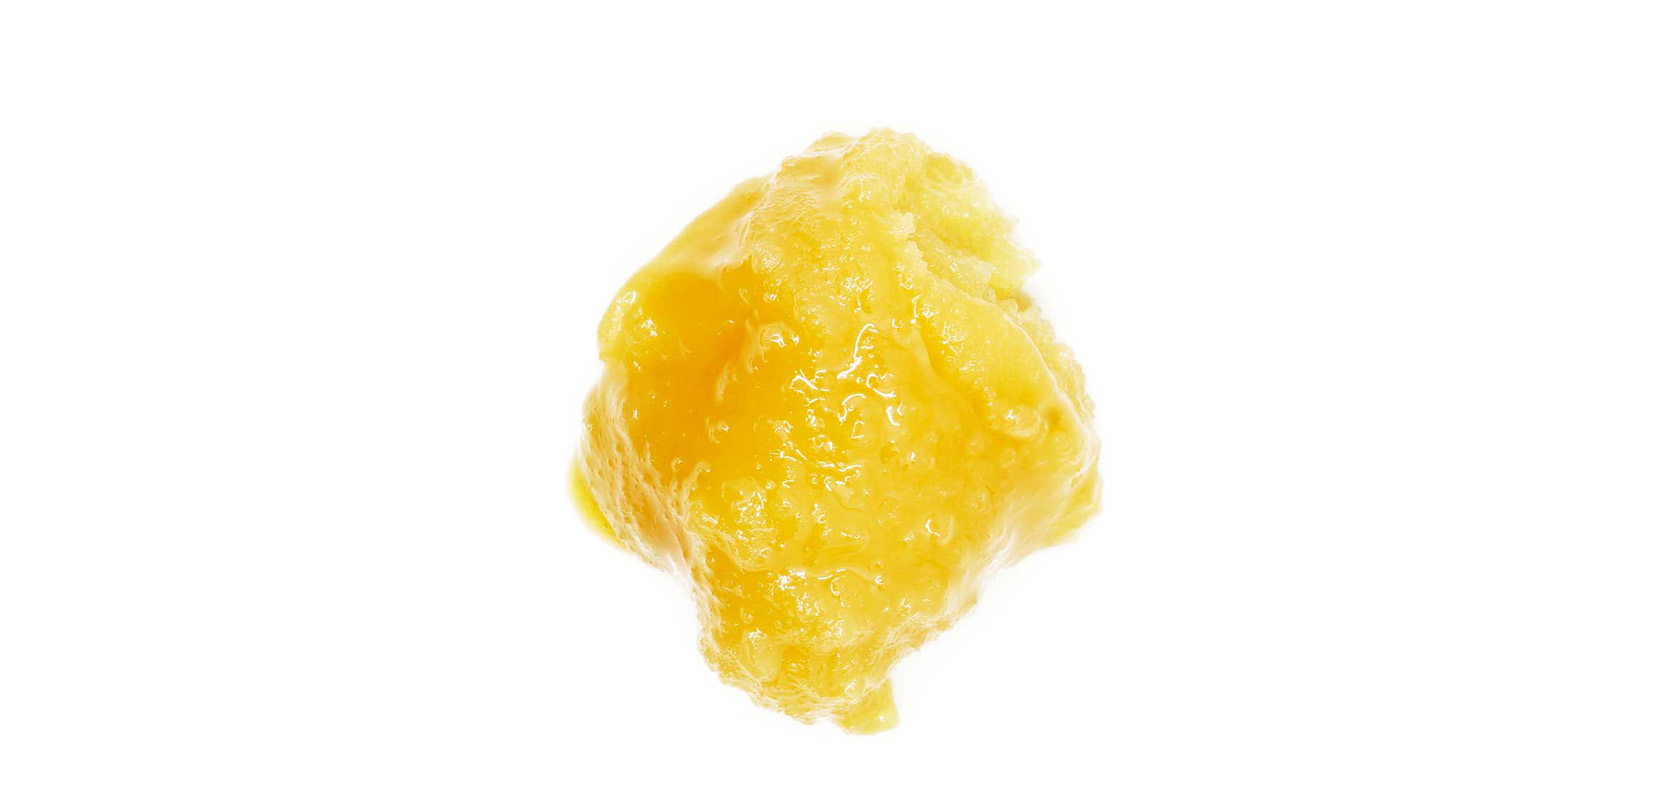 Pineapple Express Caviar. Buy cannabis concentrates online. Buy weed online Canada.